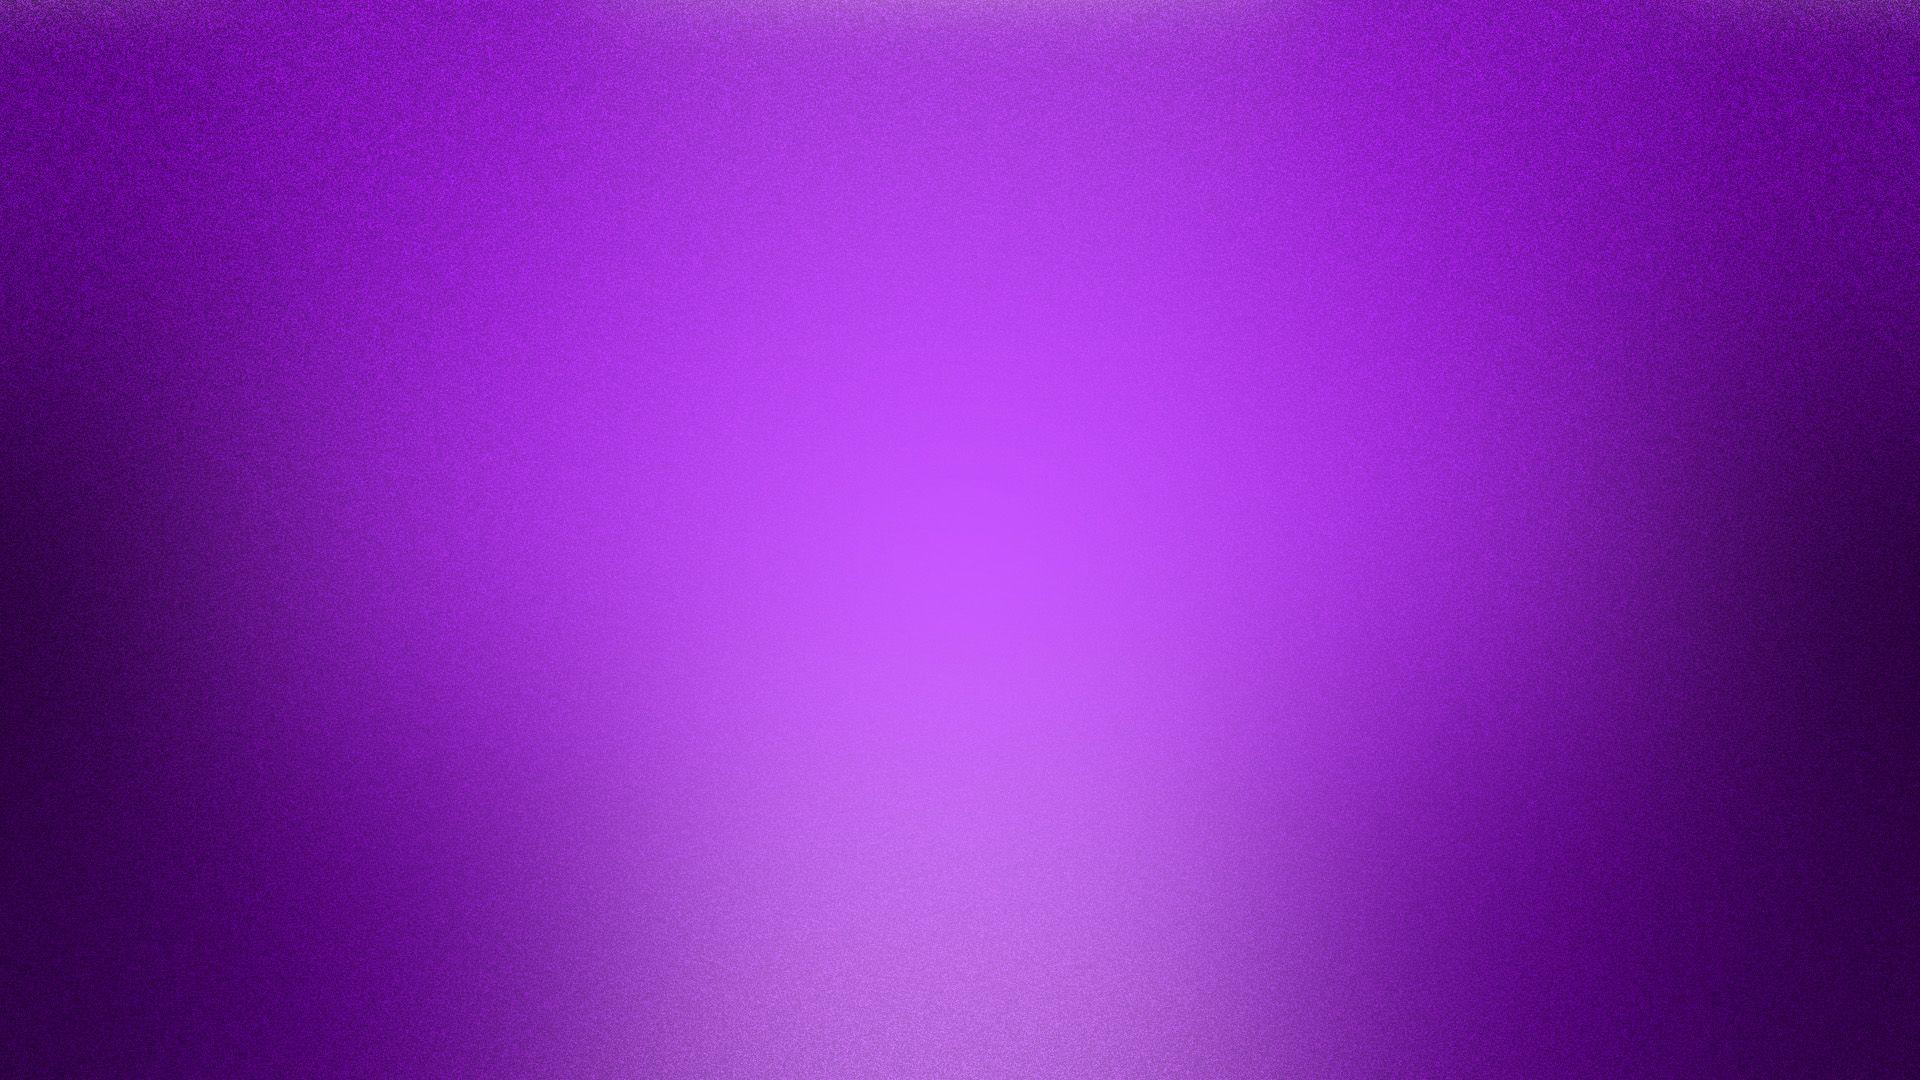 HD Purple Wallpaper Image To Use As Background 1